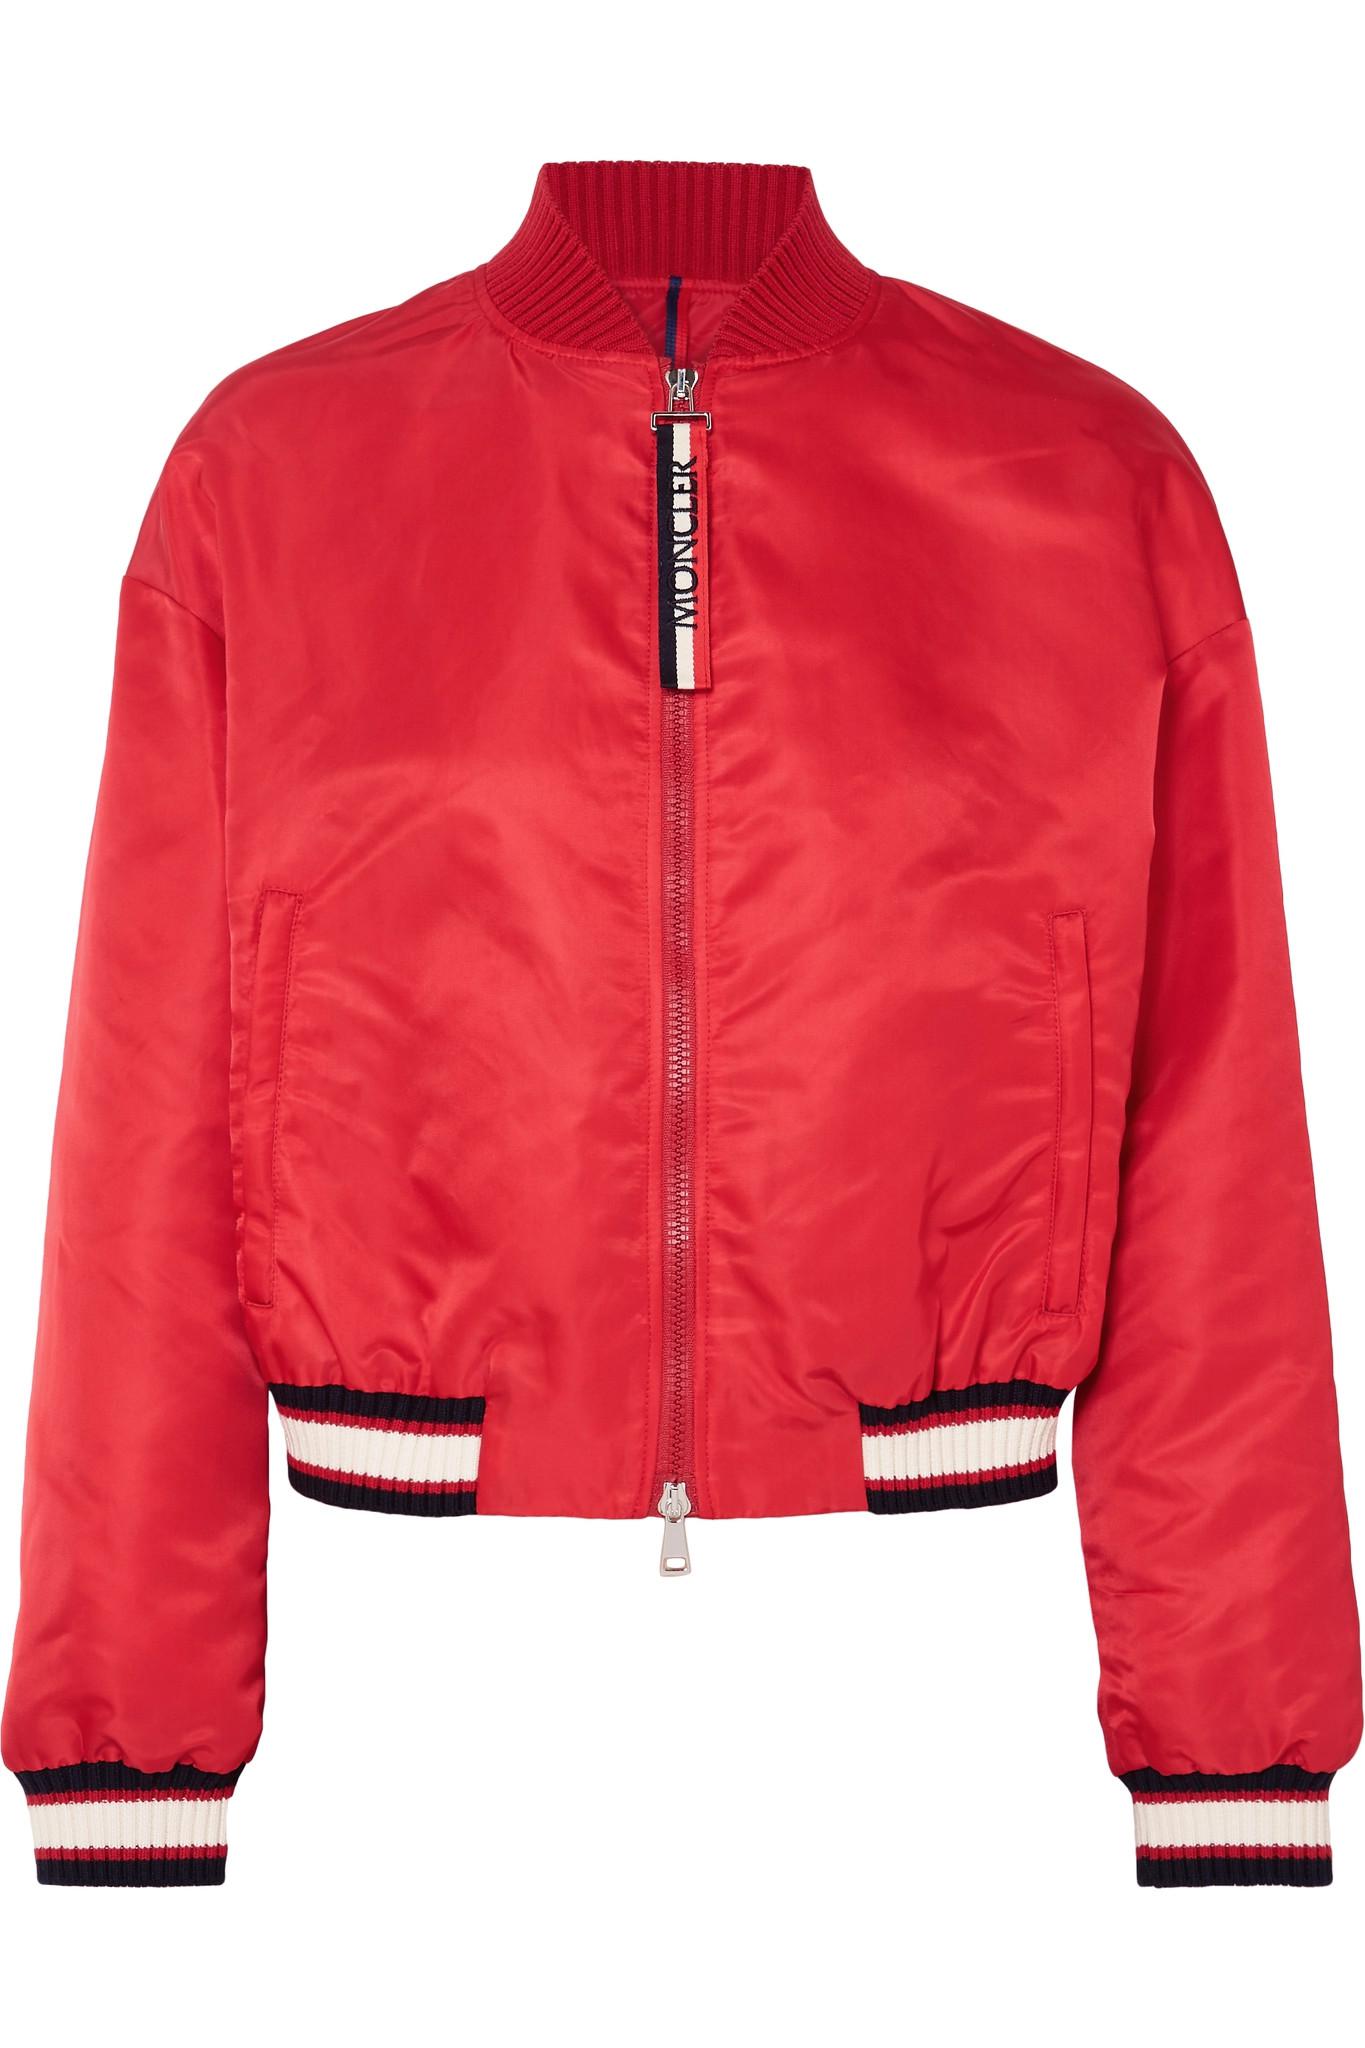 Moncler Satin-shell Bomber Jacket in Red - Lyst